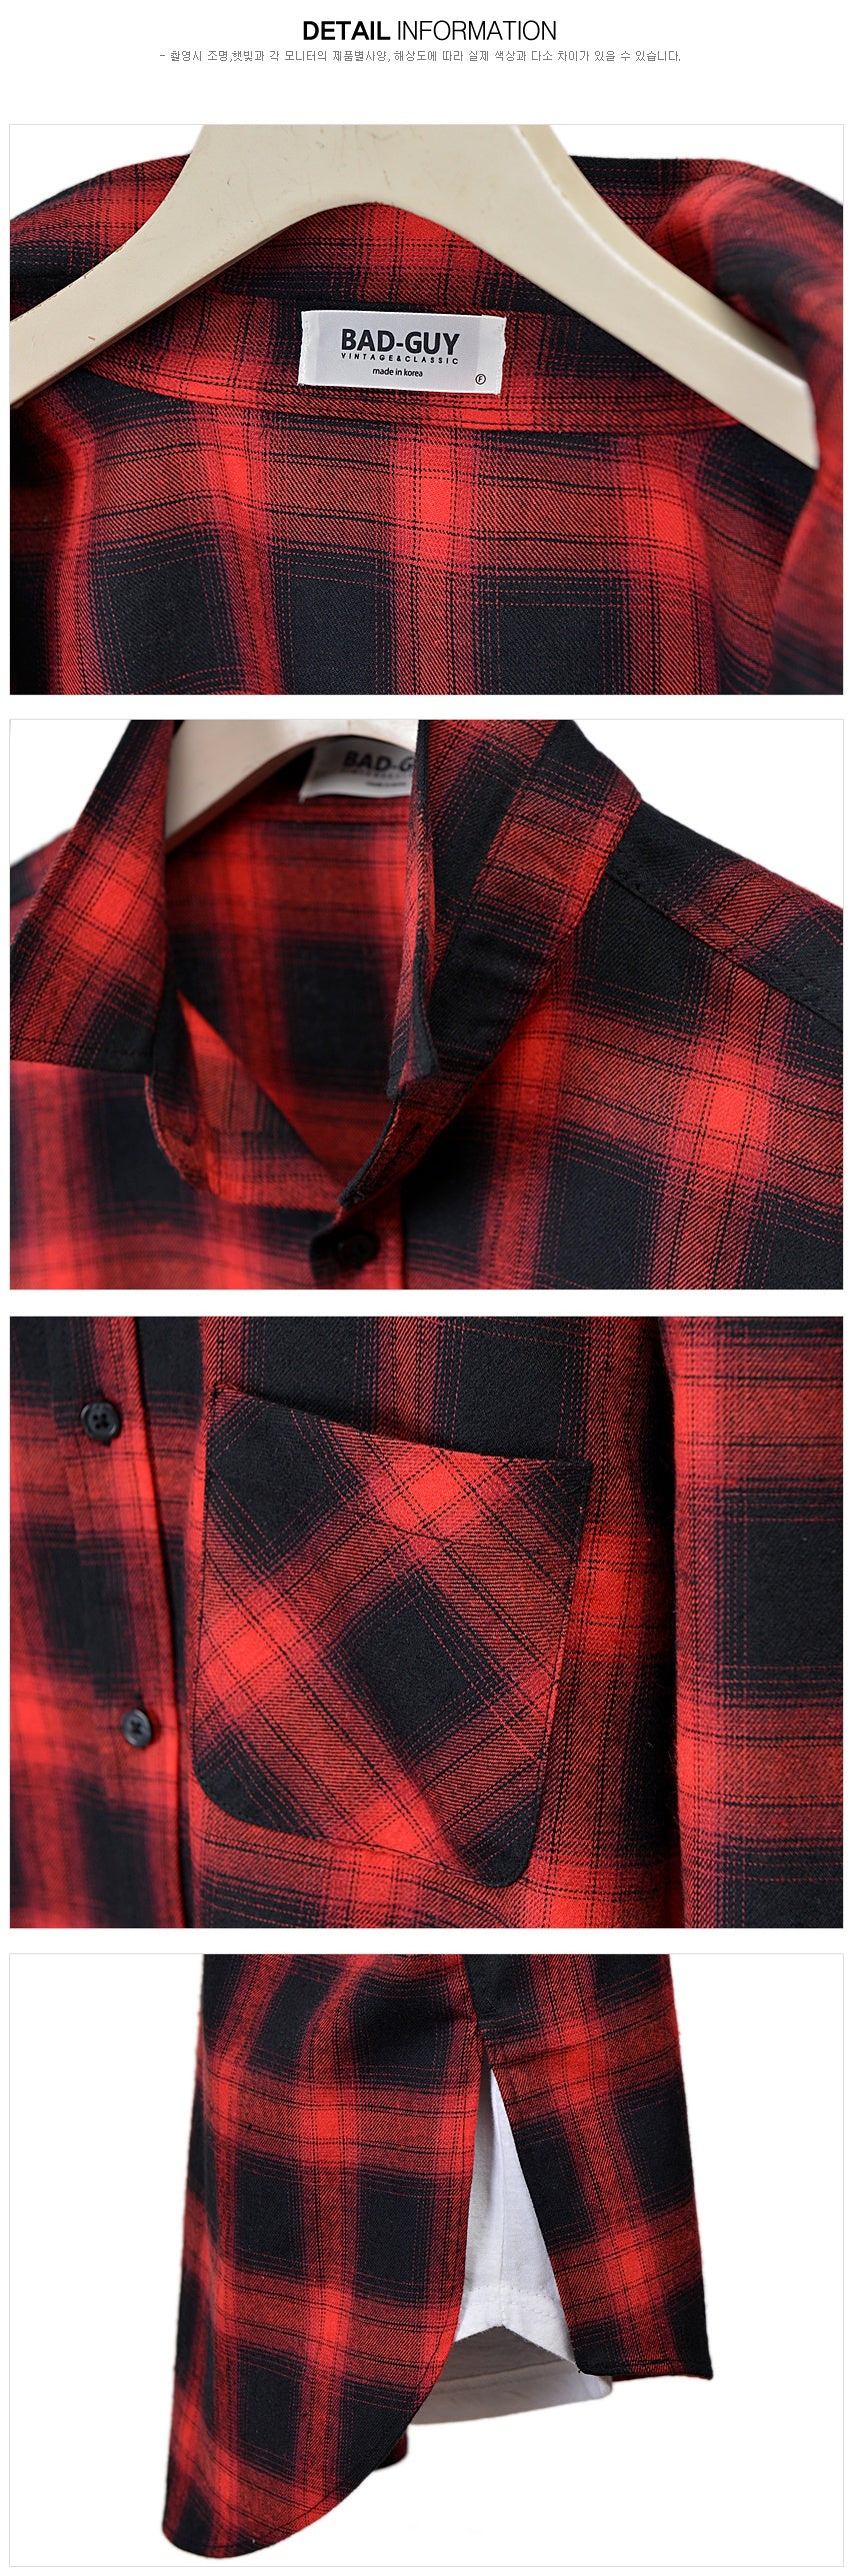 Red Brushed Tartan Checkered Plaids Long Sleeved Casual Shirts For Men